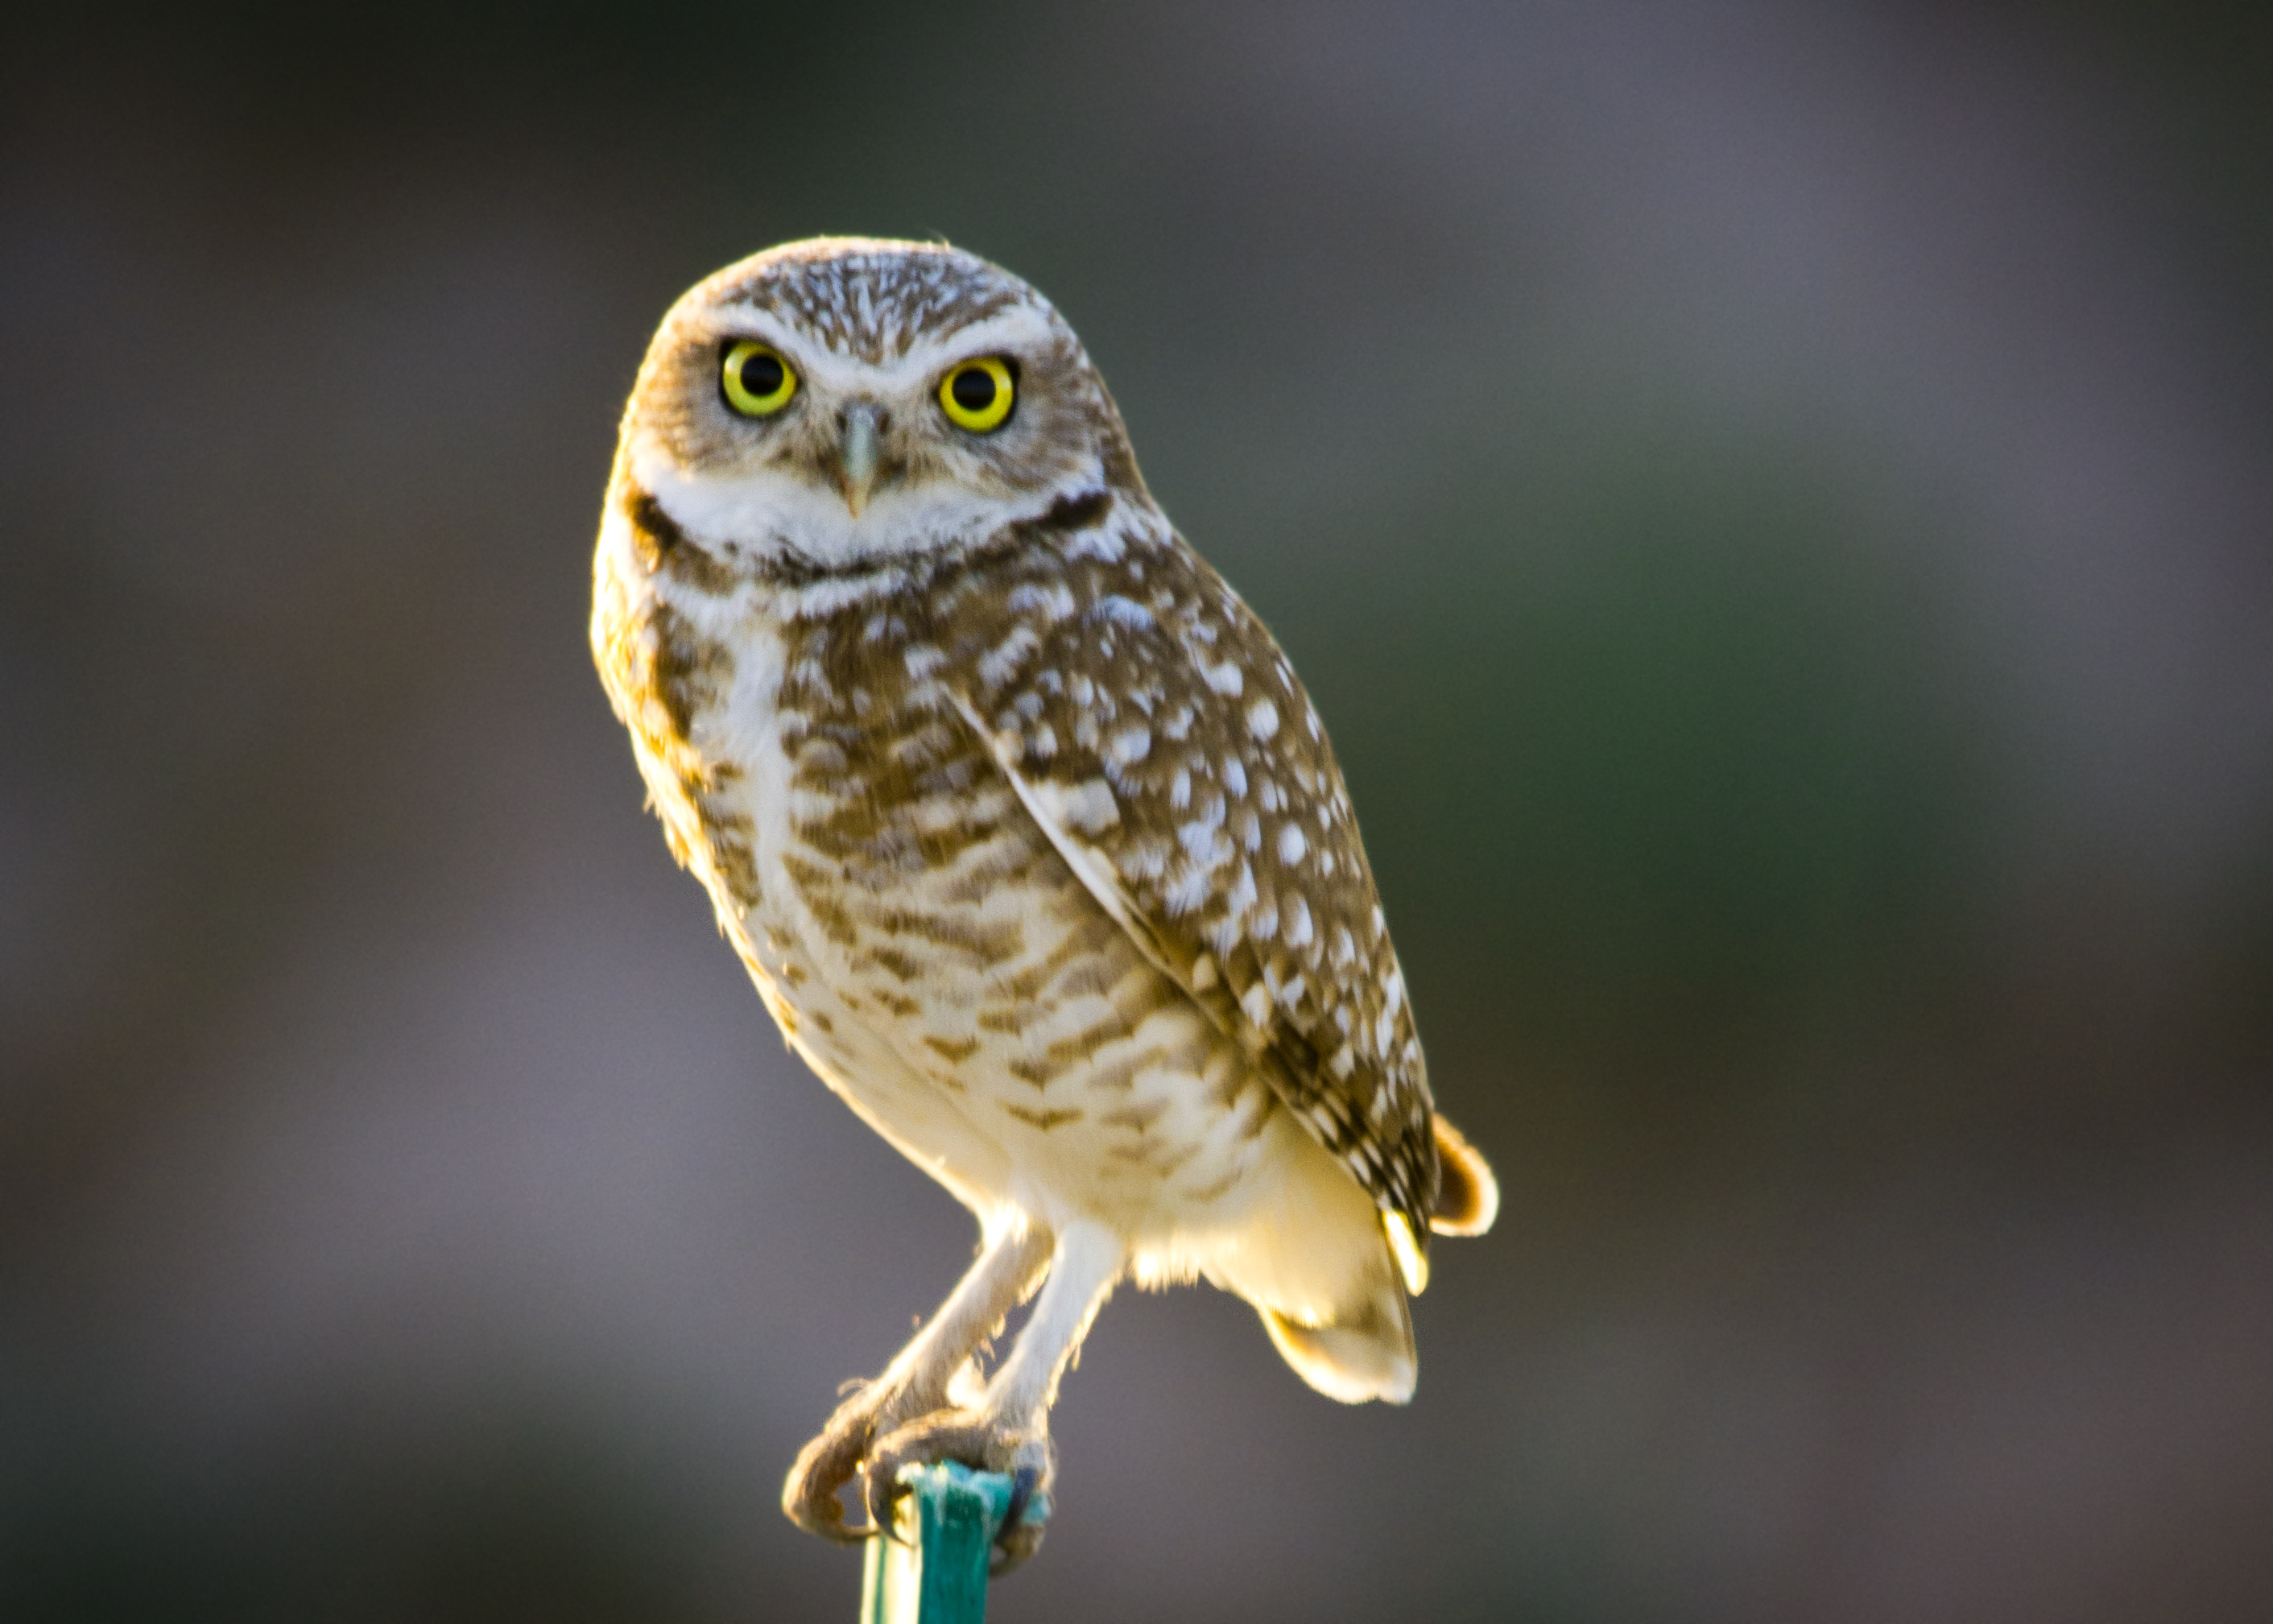 HQ Burrowing Owl Wallpapers | File 2006.47Kb